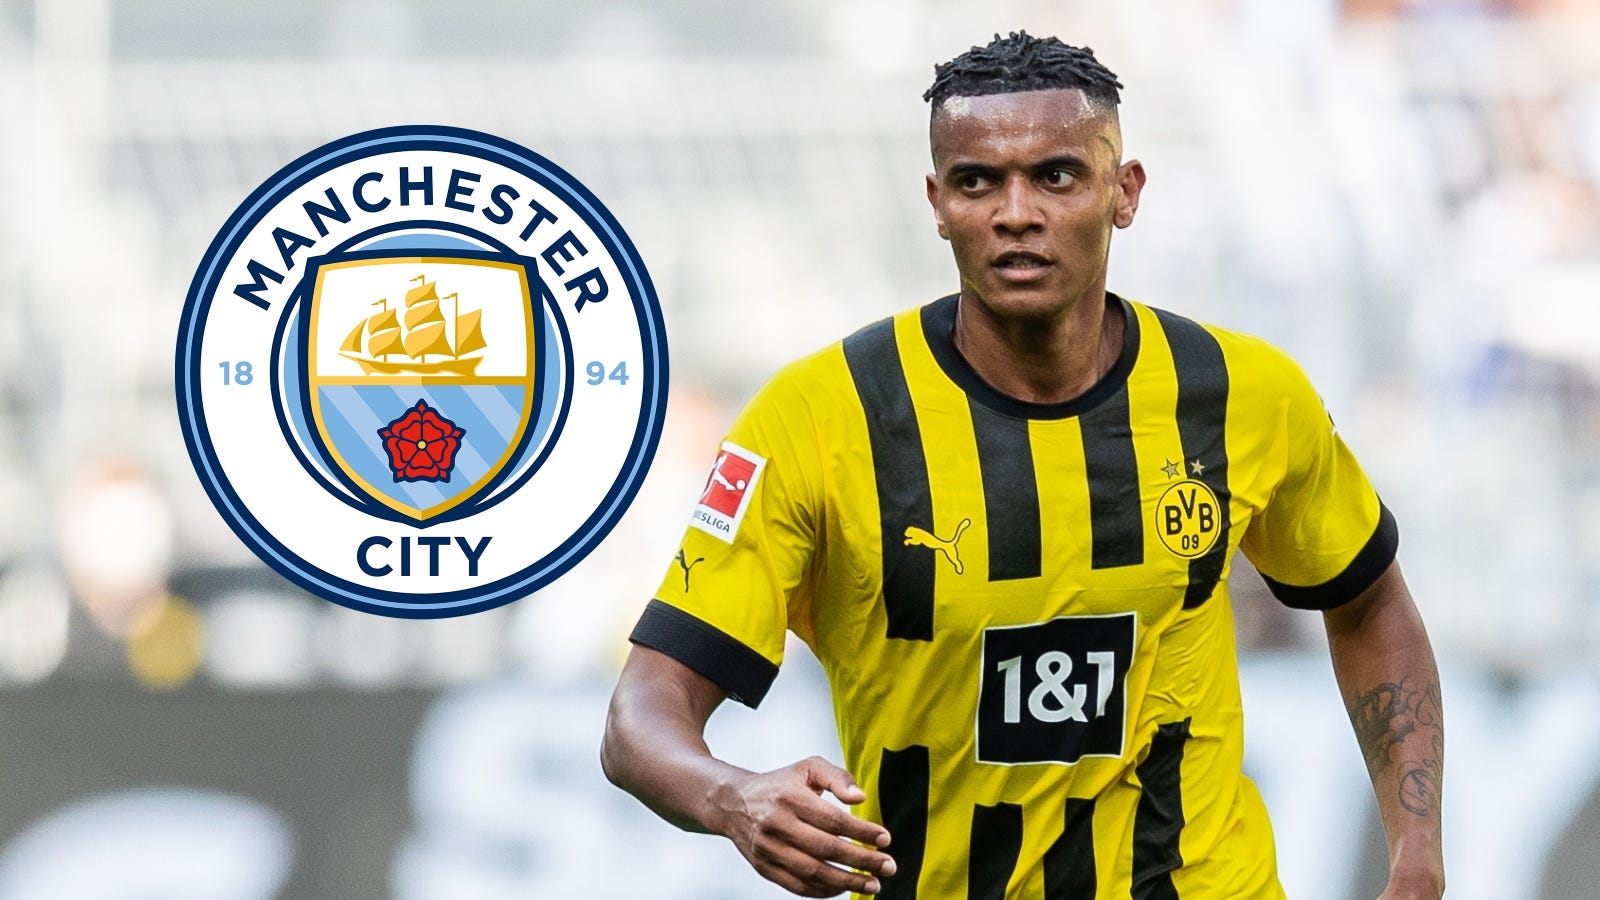 Transfer news and rumours LIVE Man City agree £14.7m deal to sign Akanji Goal